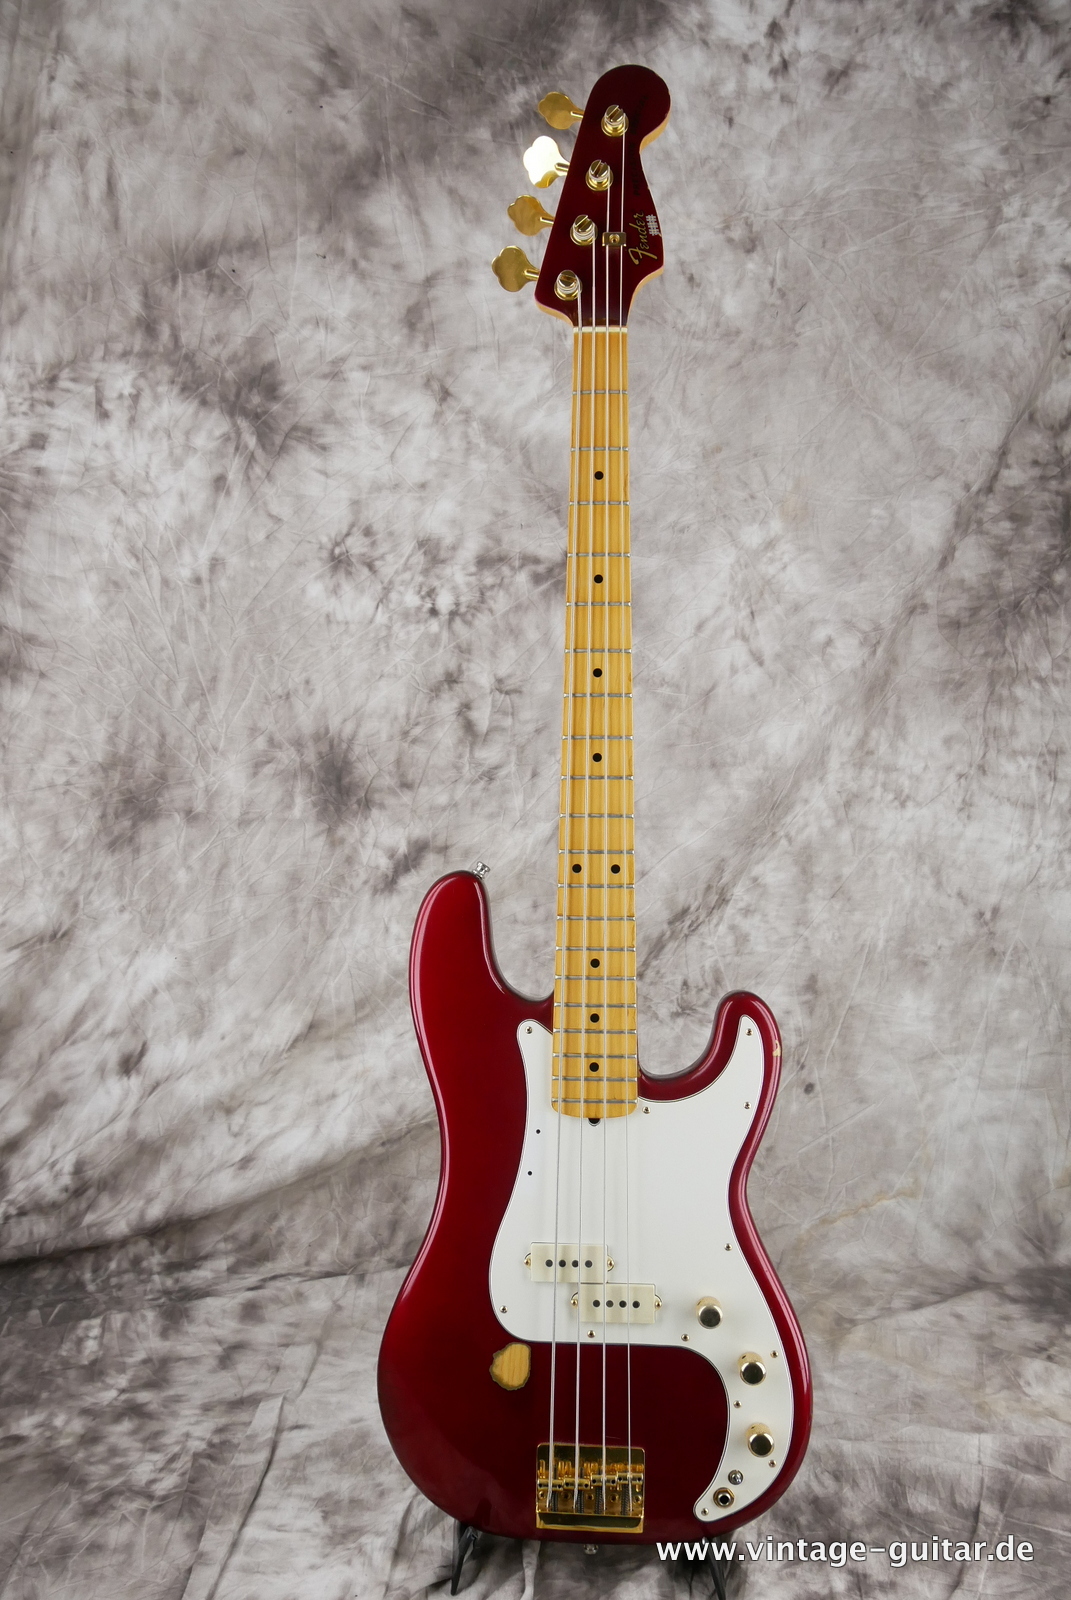 Fender_Precision_Special_USA_candy_apple_red_1982-001.JPG